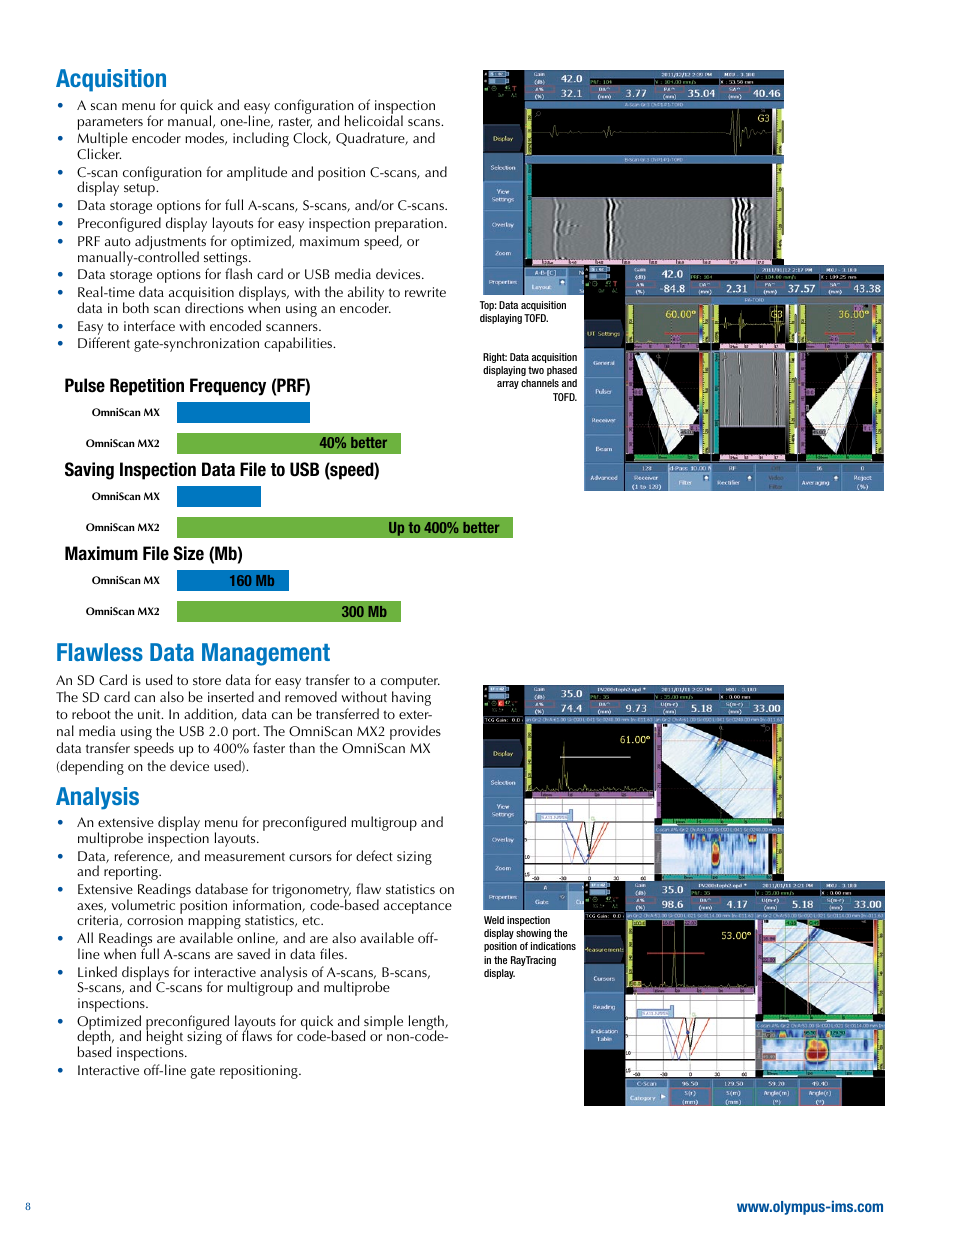 Acquisition, Flawless data management, Analysis | Atec  Panametrics-Olympus-Omniscan-MX2 User Manual | Page 8 / 12 | Original mode